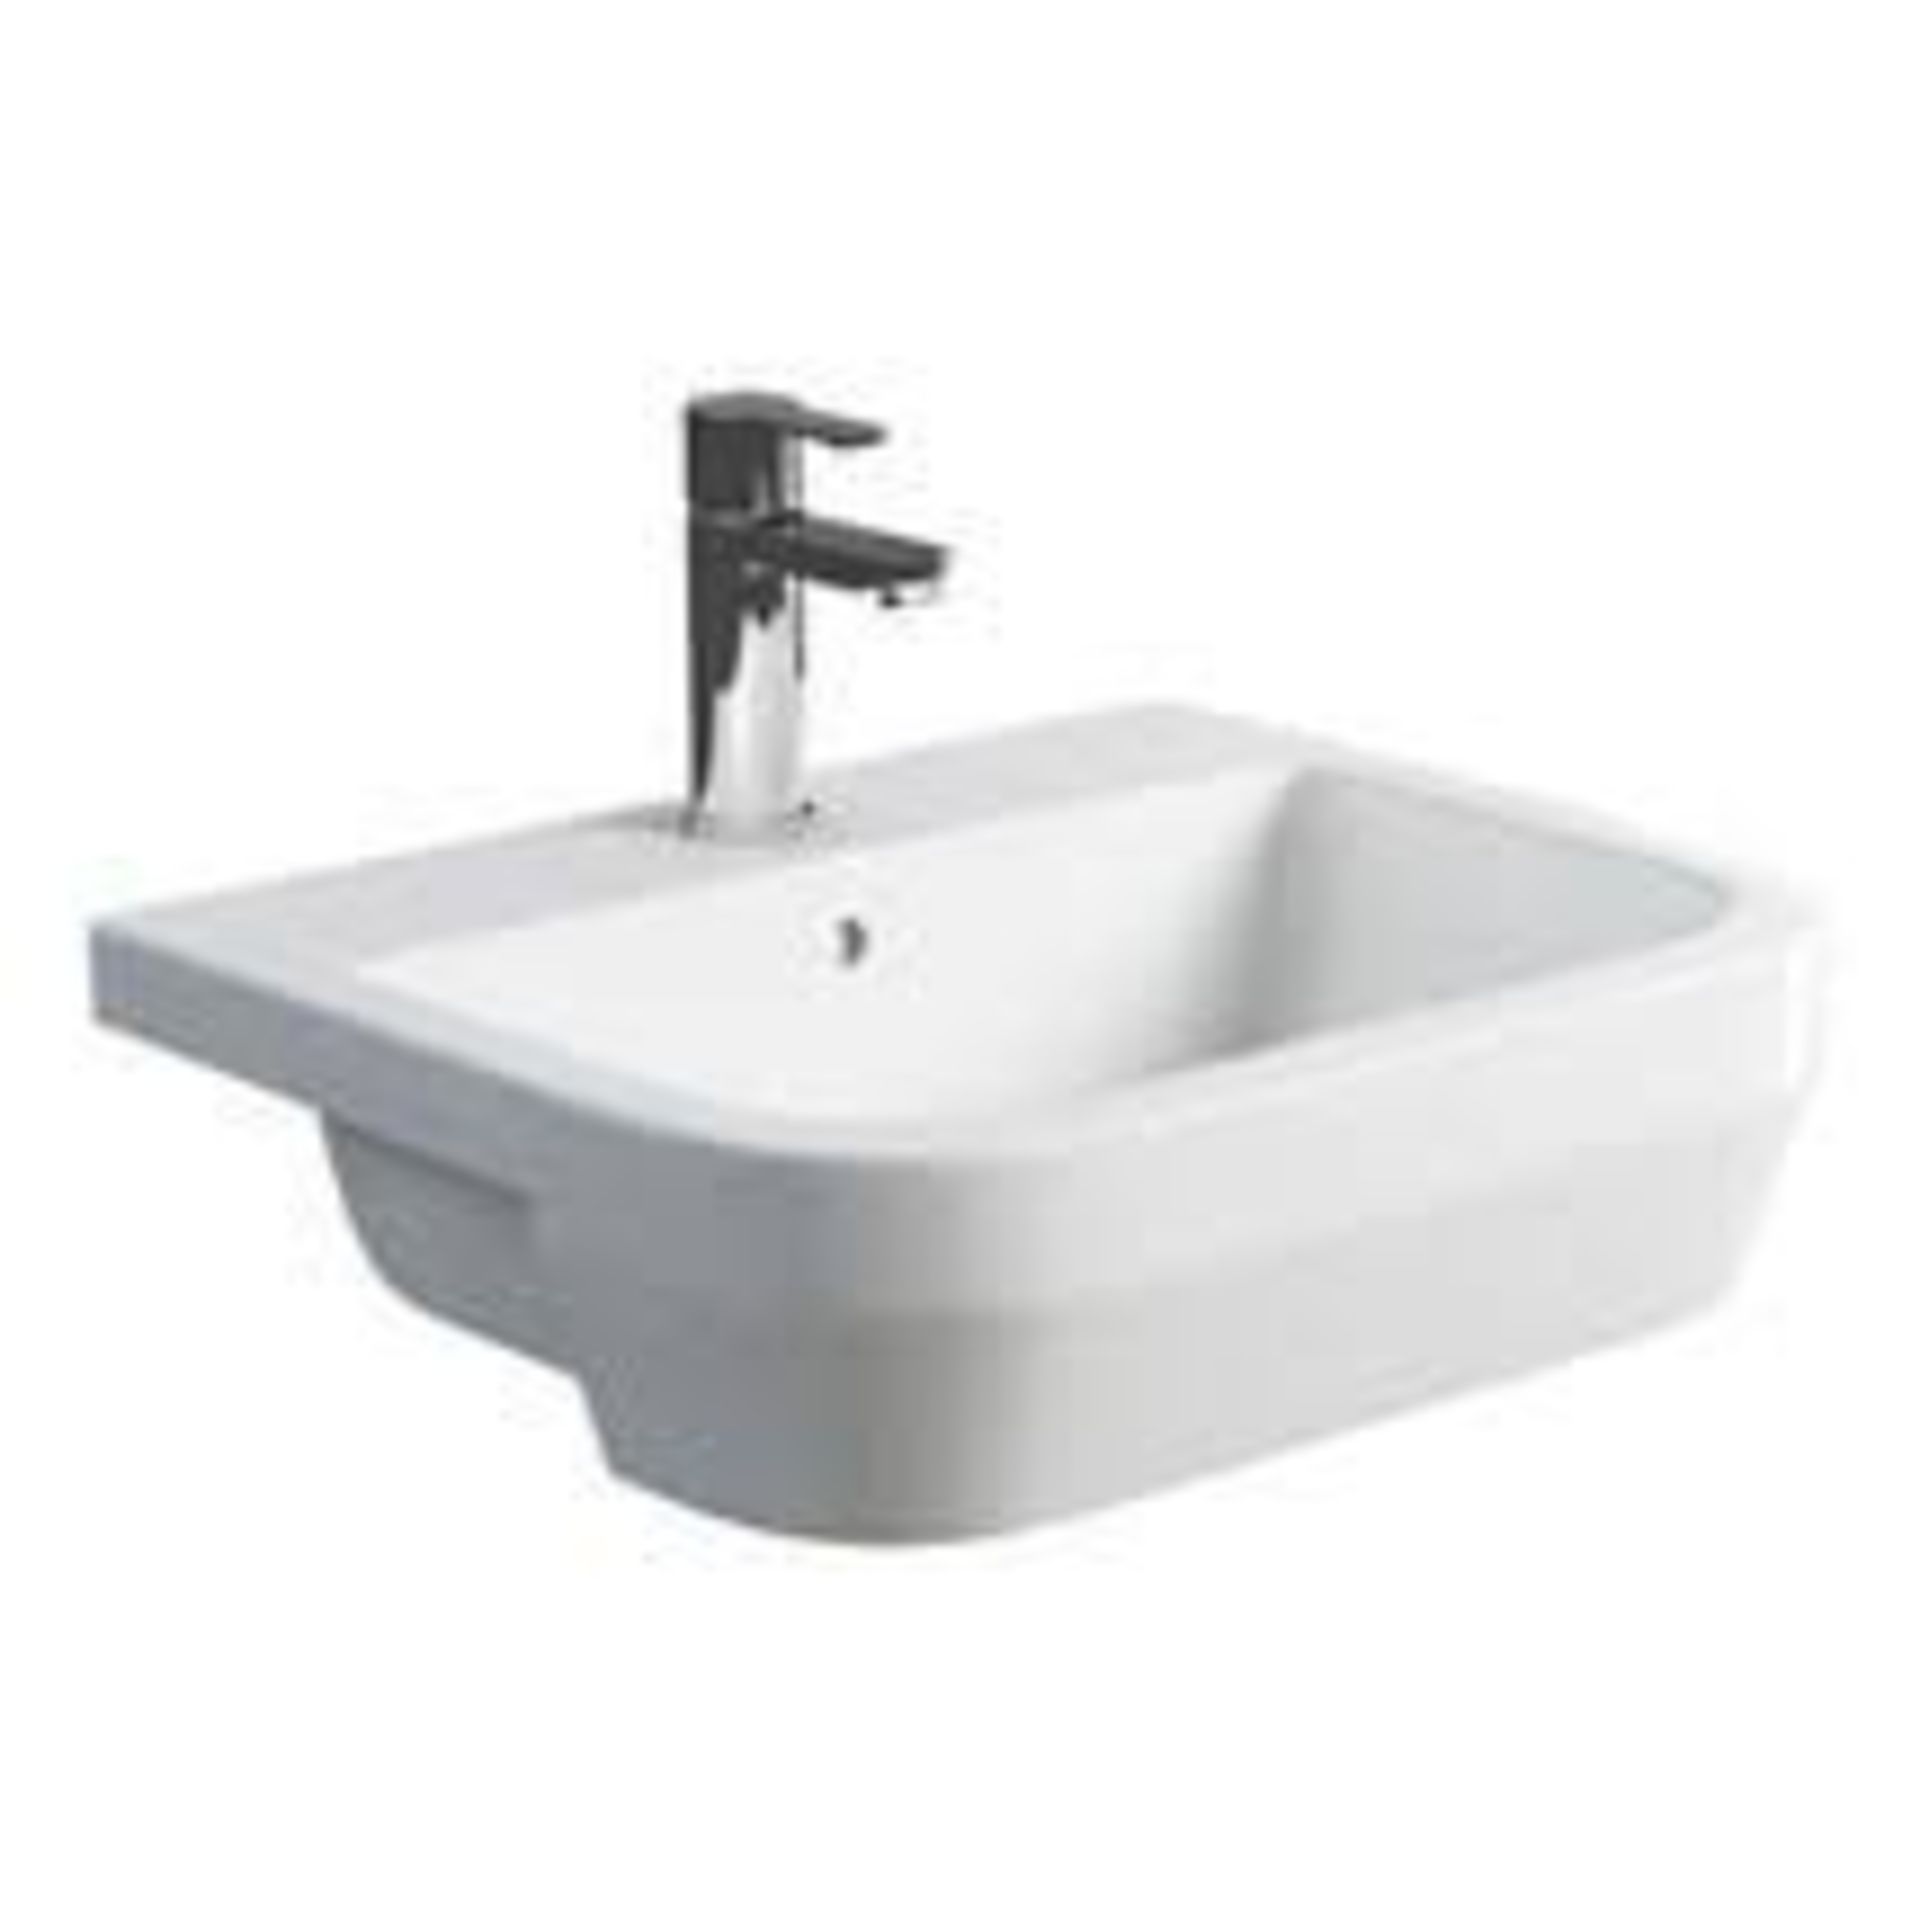 Pallet - 232 - 16 x Phase Short Projection Basin - SKU - 520940 RRP £479.84 - Image 3 of 3